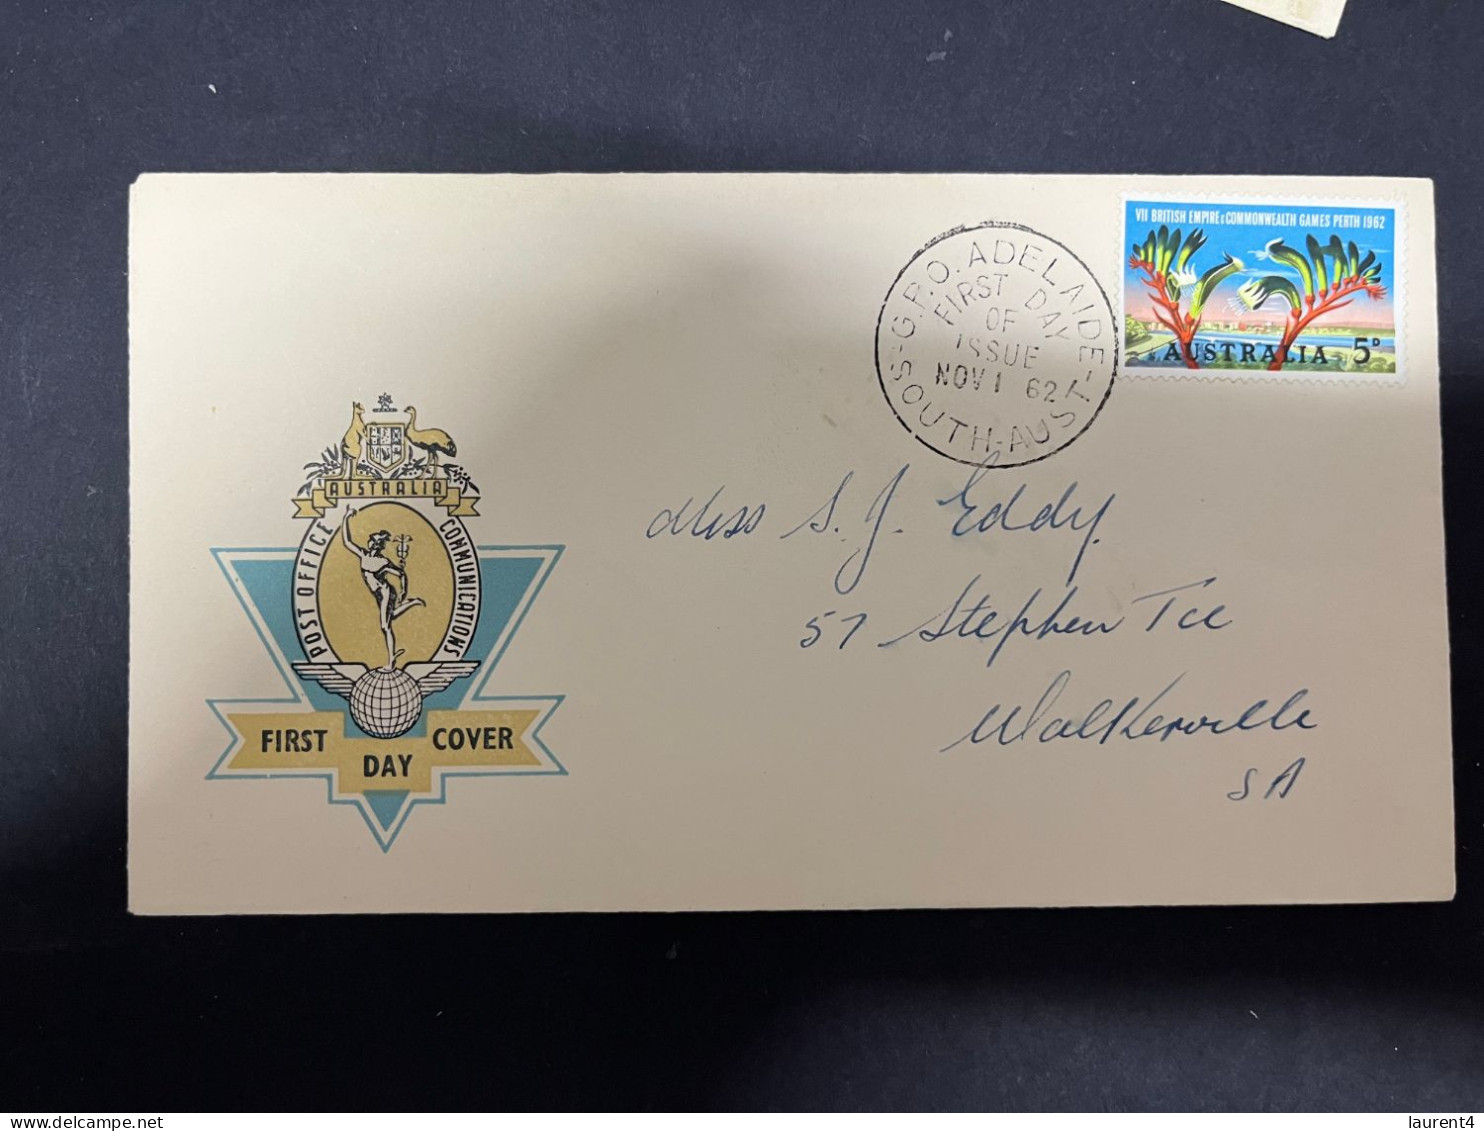 14-5-2024 (5 Z 9) Australia FDC - 1962 - Perth British Empire Games (now Called Commonwealth Games) - Ersttagsbelege (FDC)